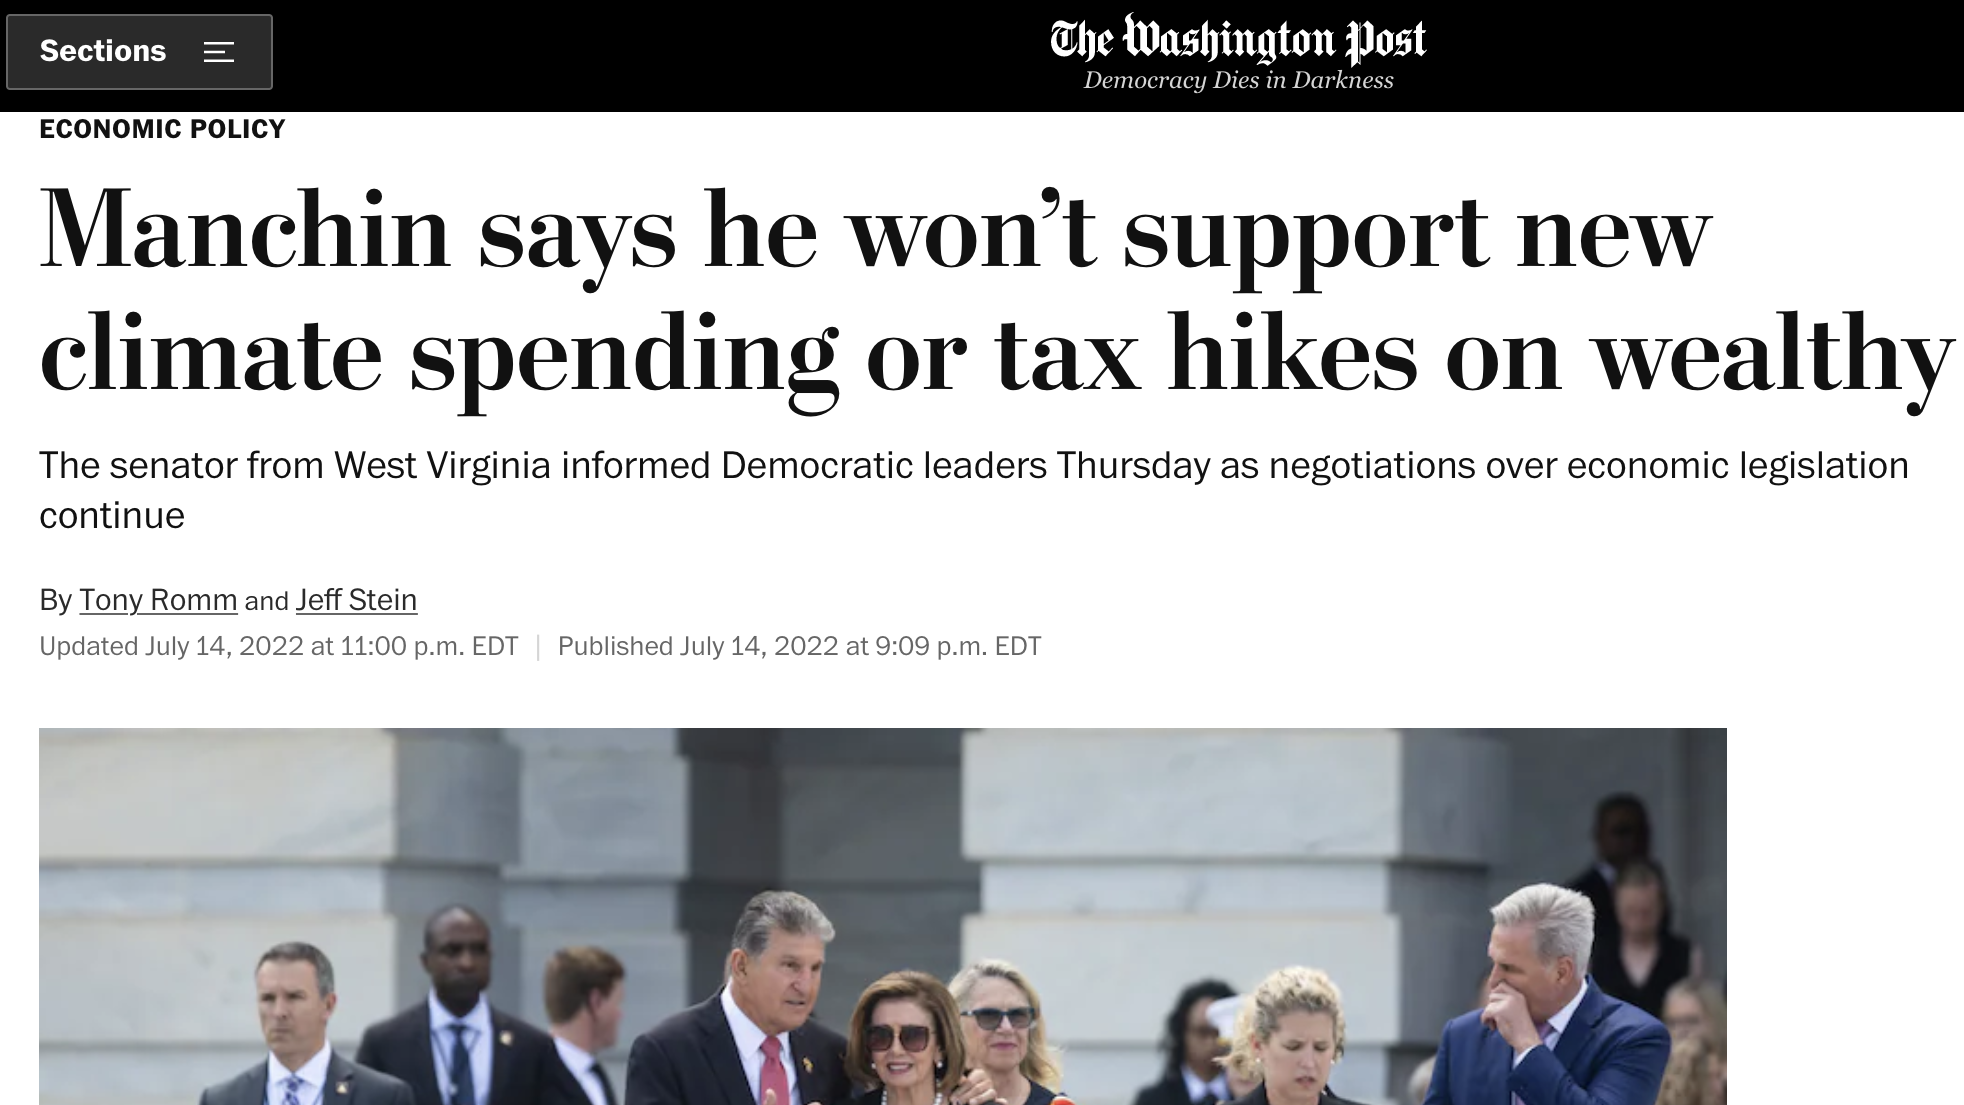 A headline in the Washington post reads "Manchin says he won't support any new climate spending or tax hikes on wealthy"